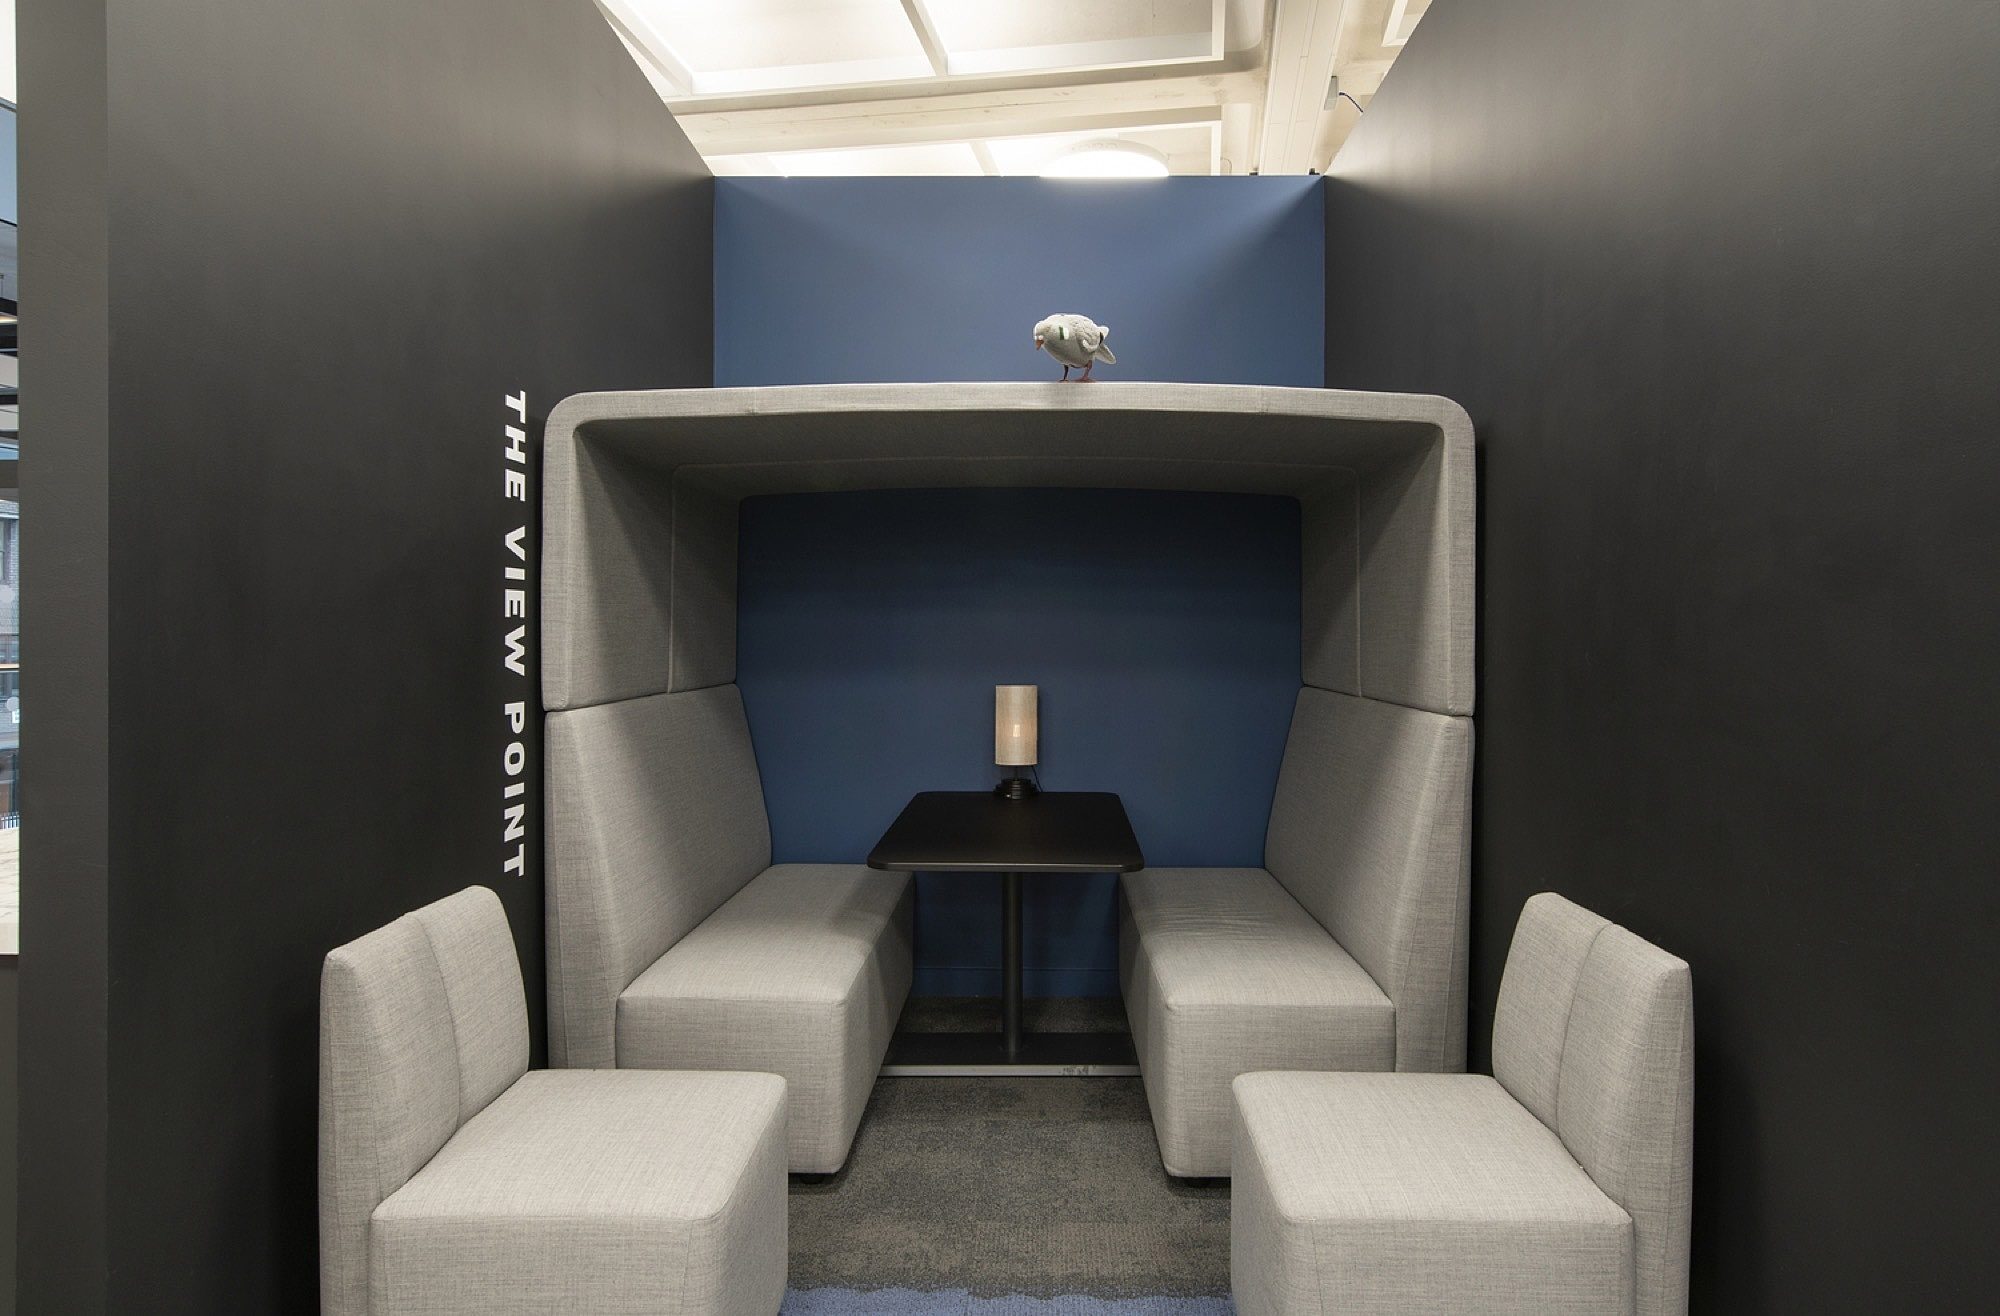 Metapack office pod fit out